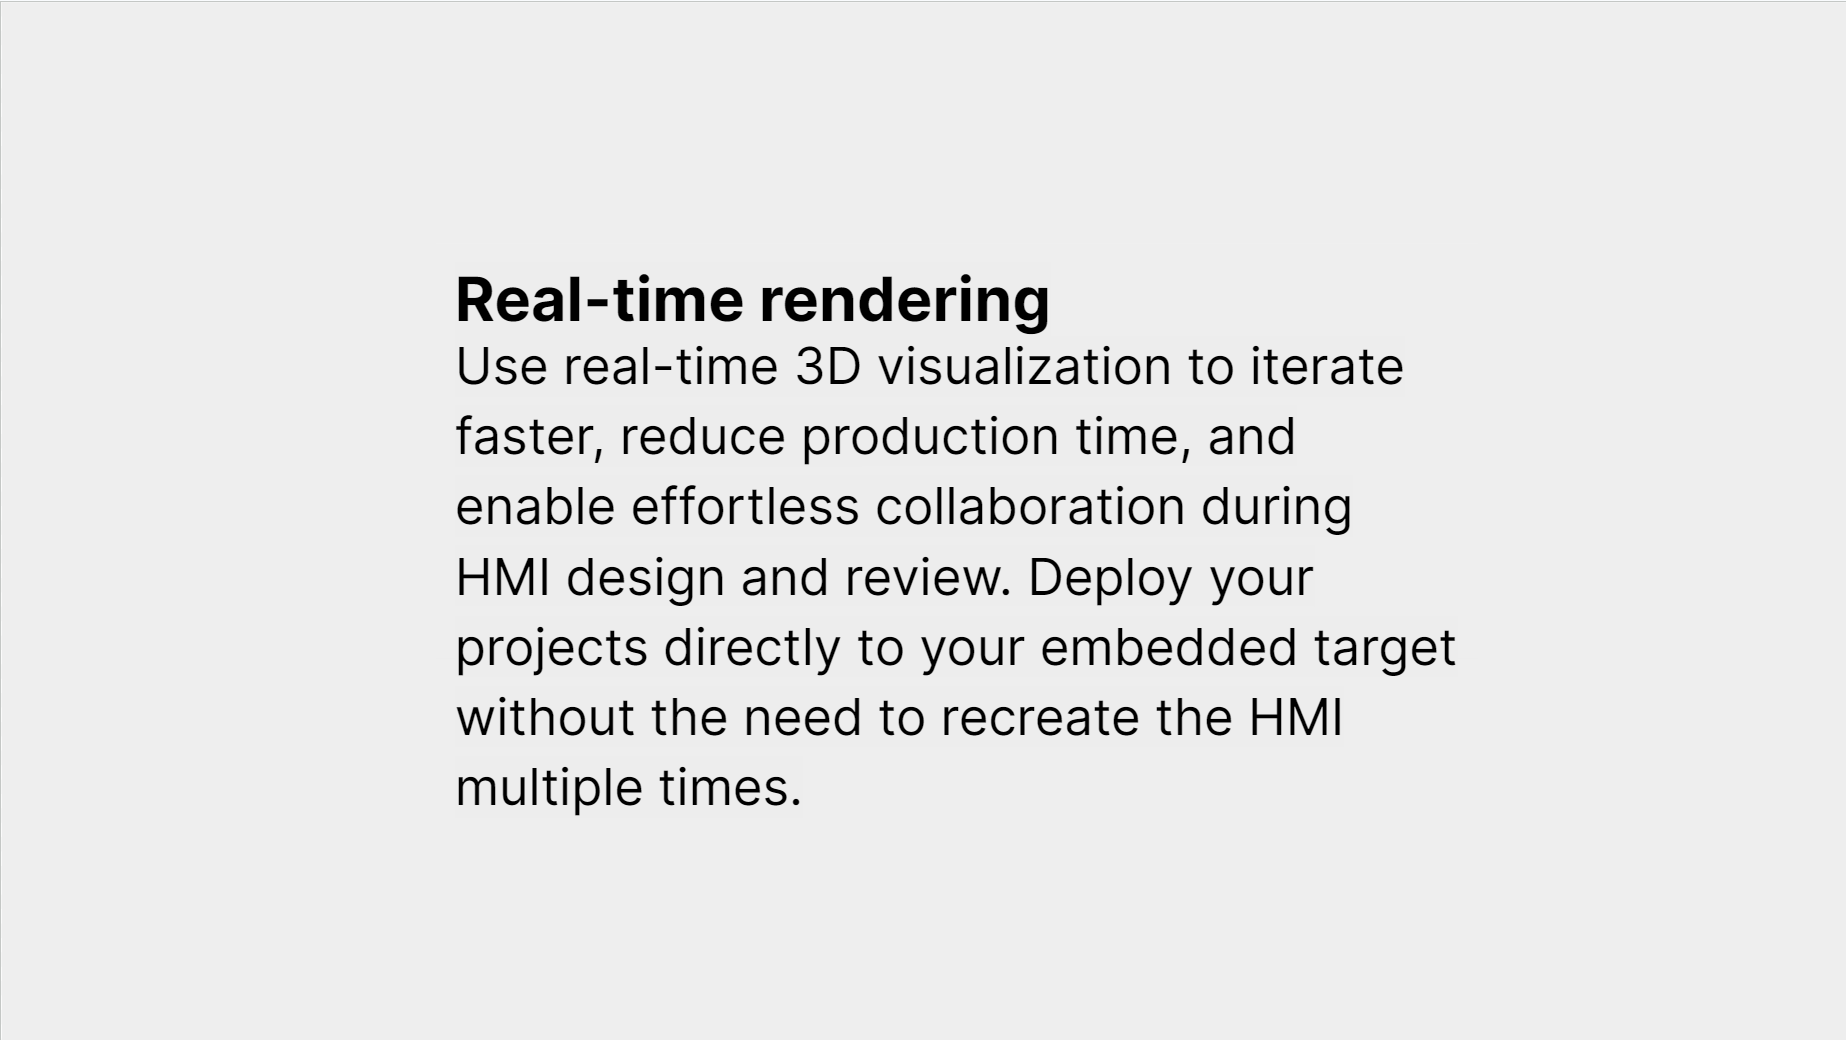 Unity for HMI benefit: Real-time rendering